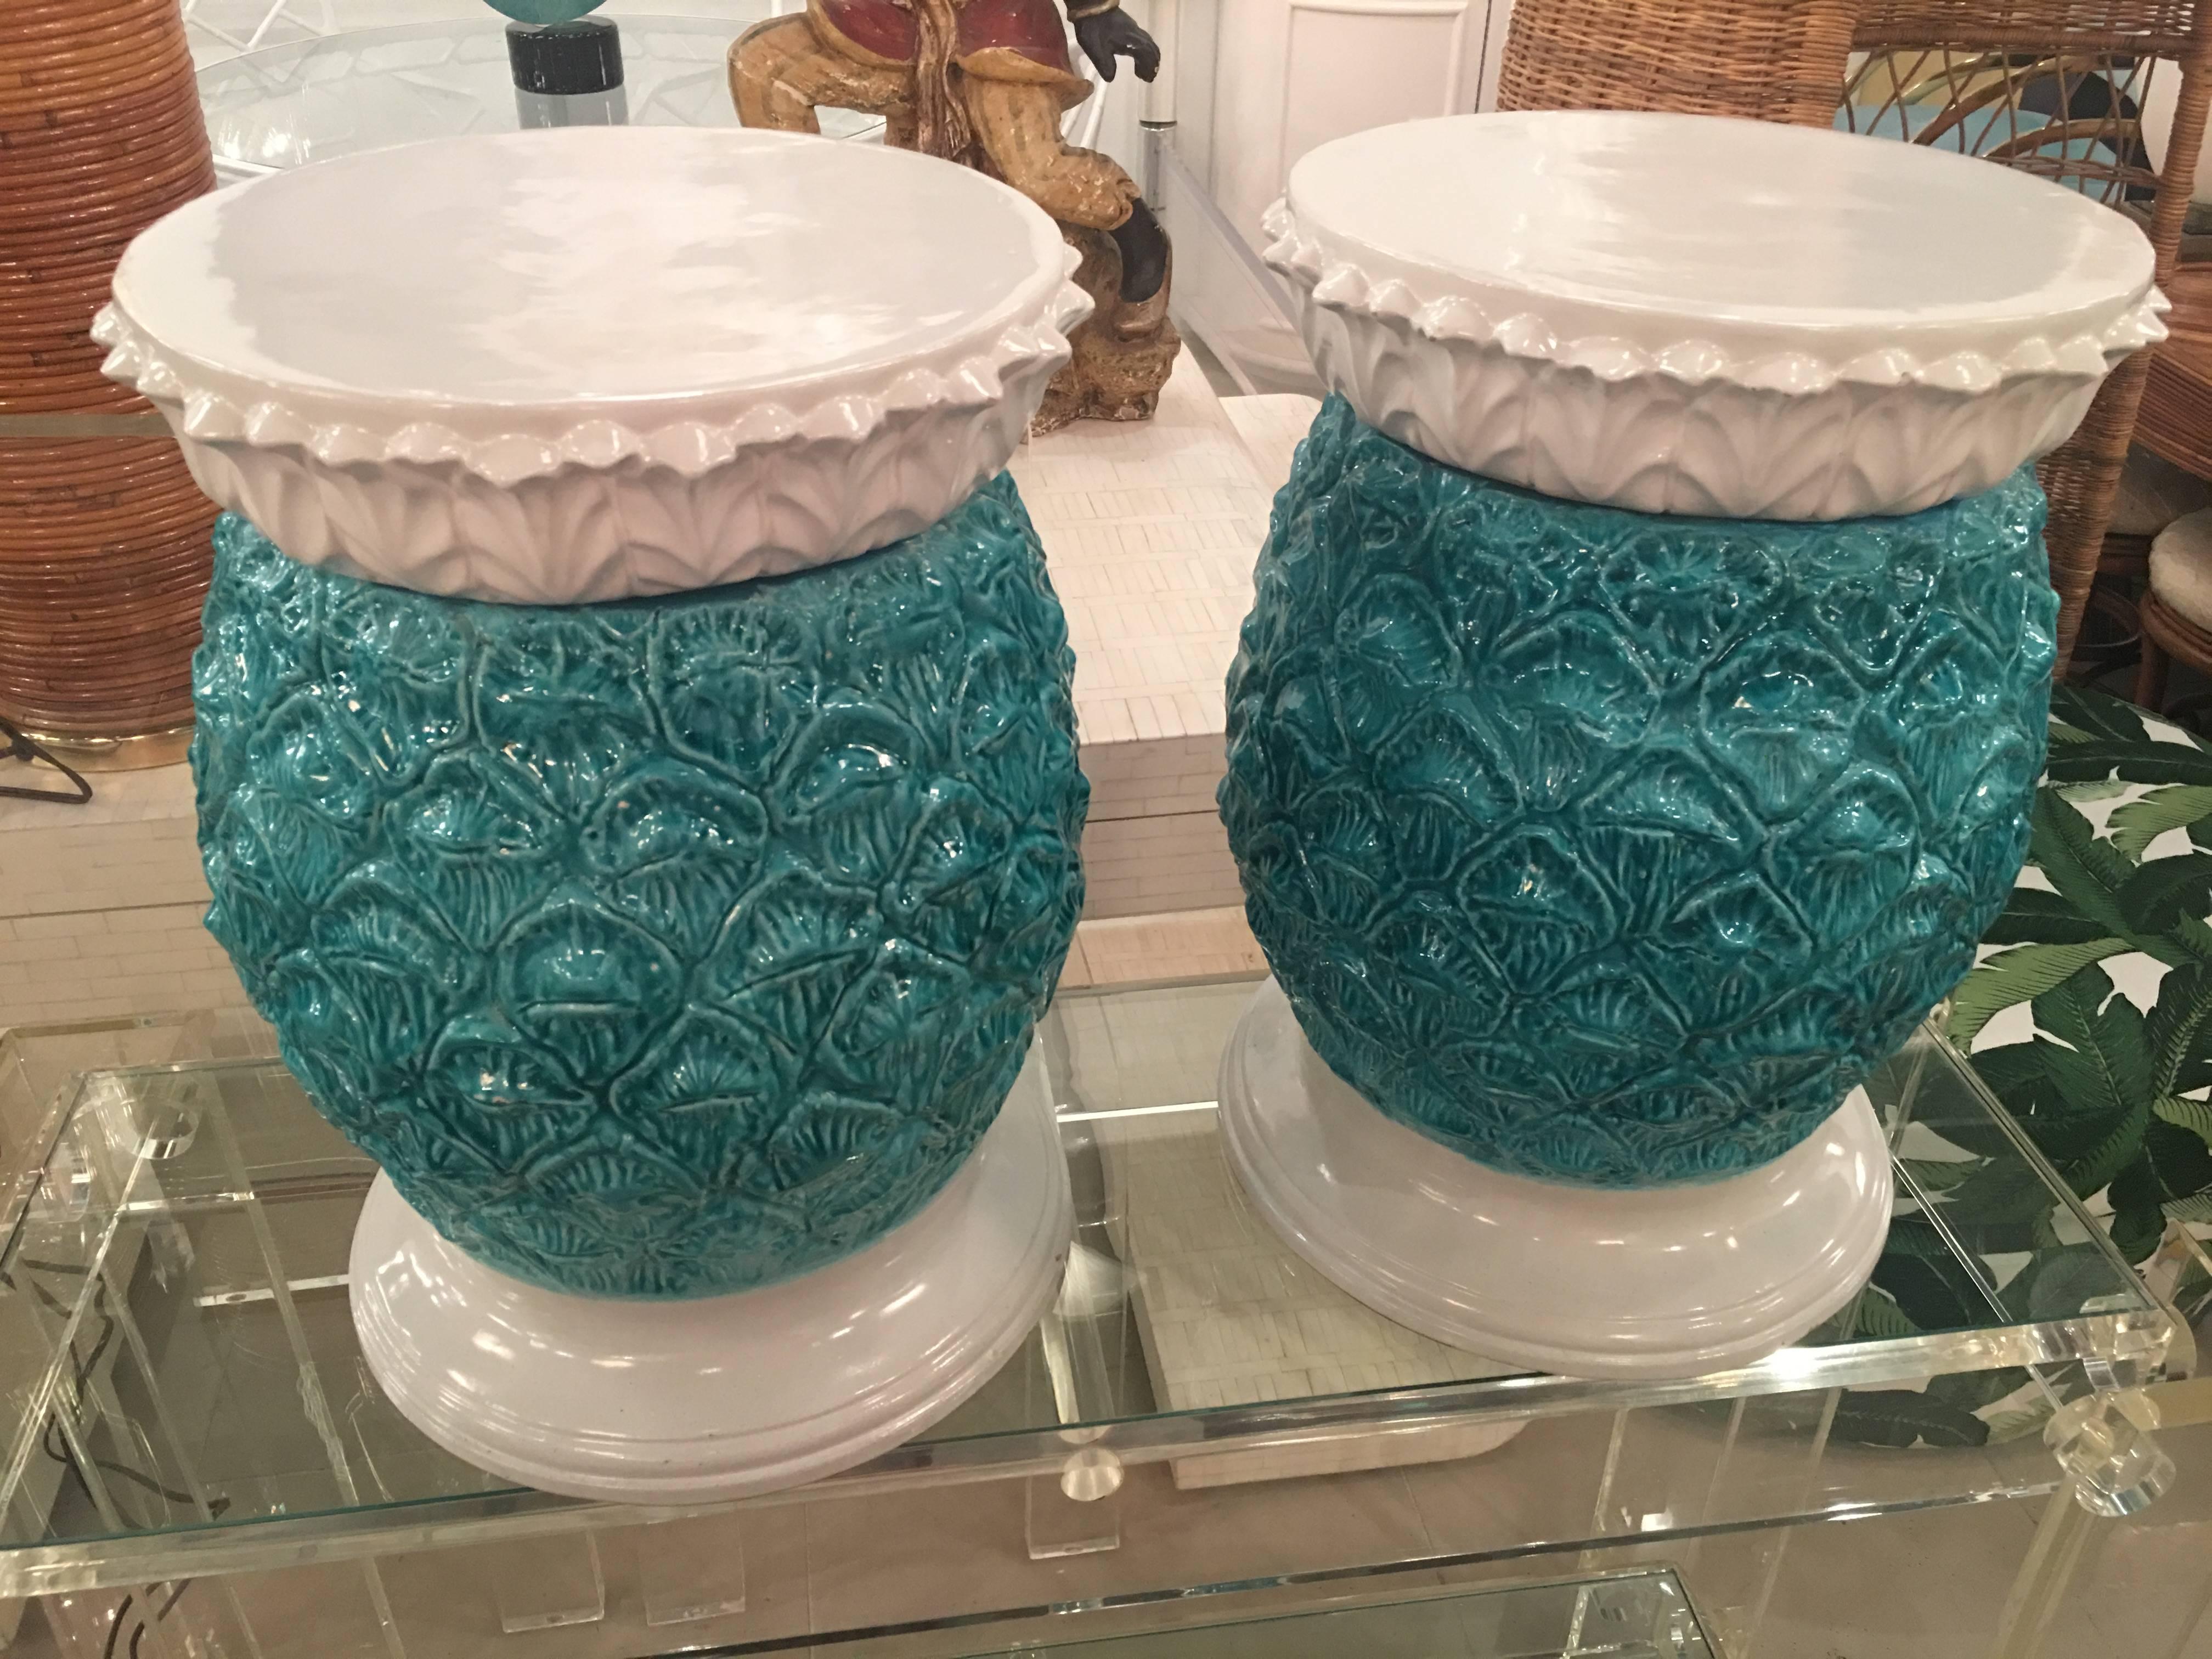 The most amazing pair of vintage, made in Italy, Italian garden stools, stands. Perfect indoors or outdoors, glazed terra cotta, heavy, tops come off. The beautiful teals and blues from the glaze are amazing! Can be used as garden stands, stools,